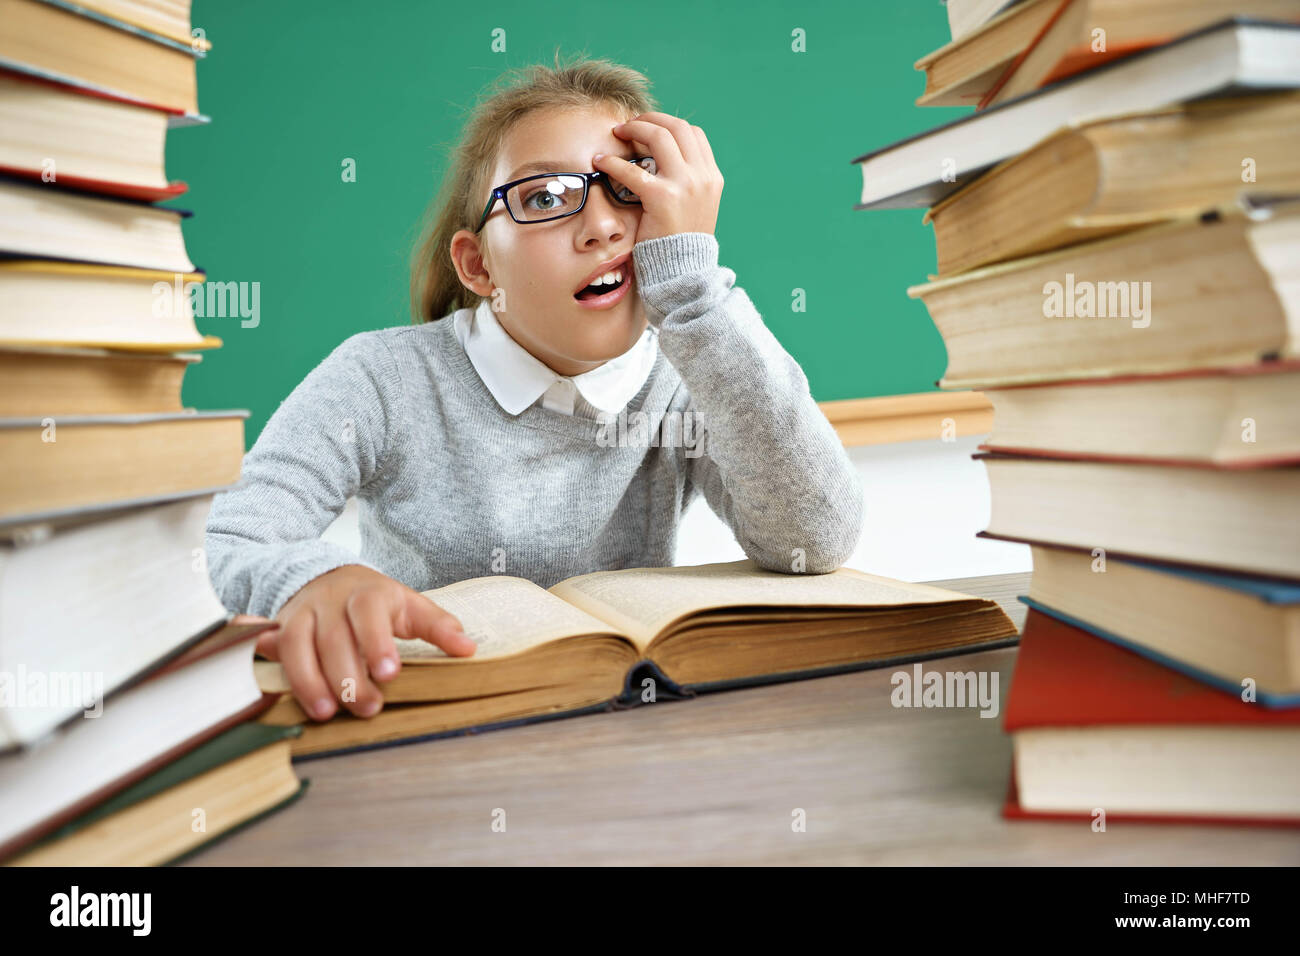 Exhausted or bored schoolgirl around a lots of books. Photo of little girl in classroom. Education concept Stock Photo